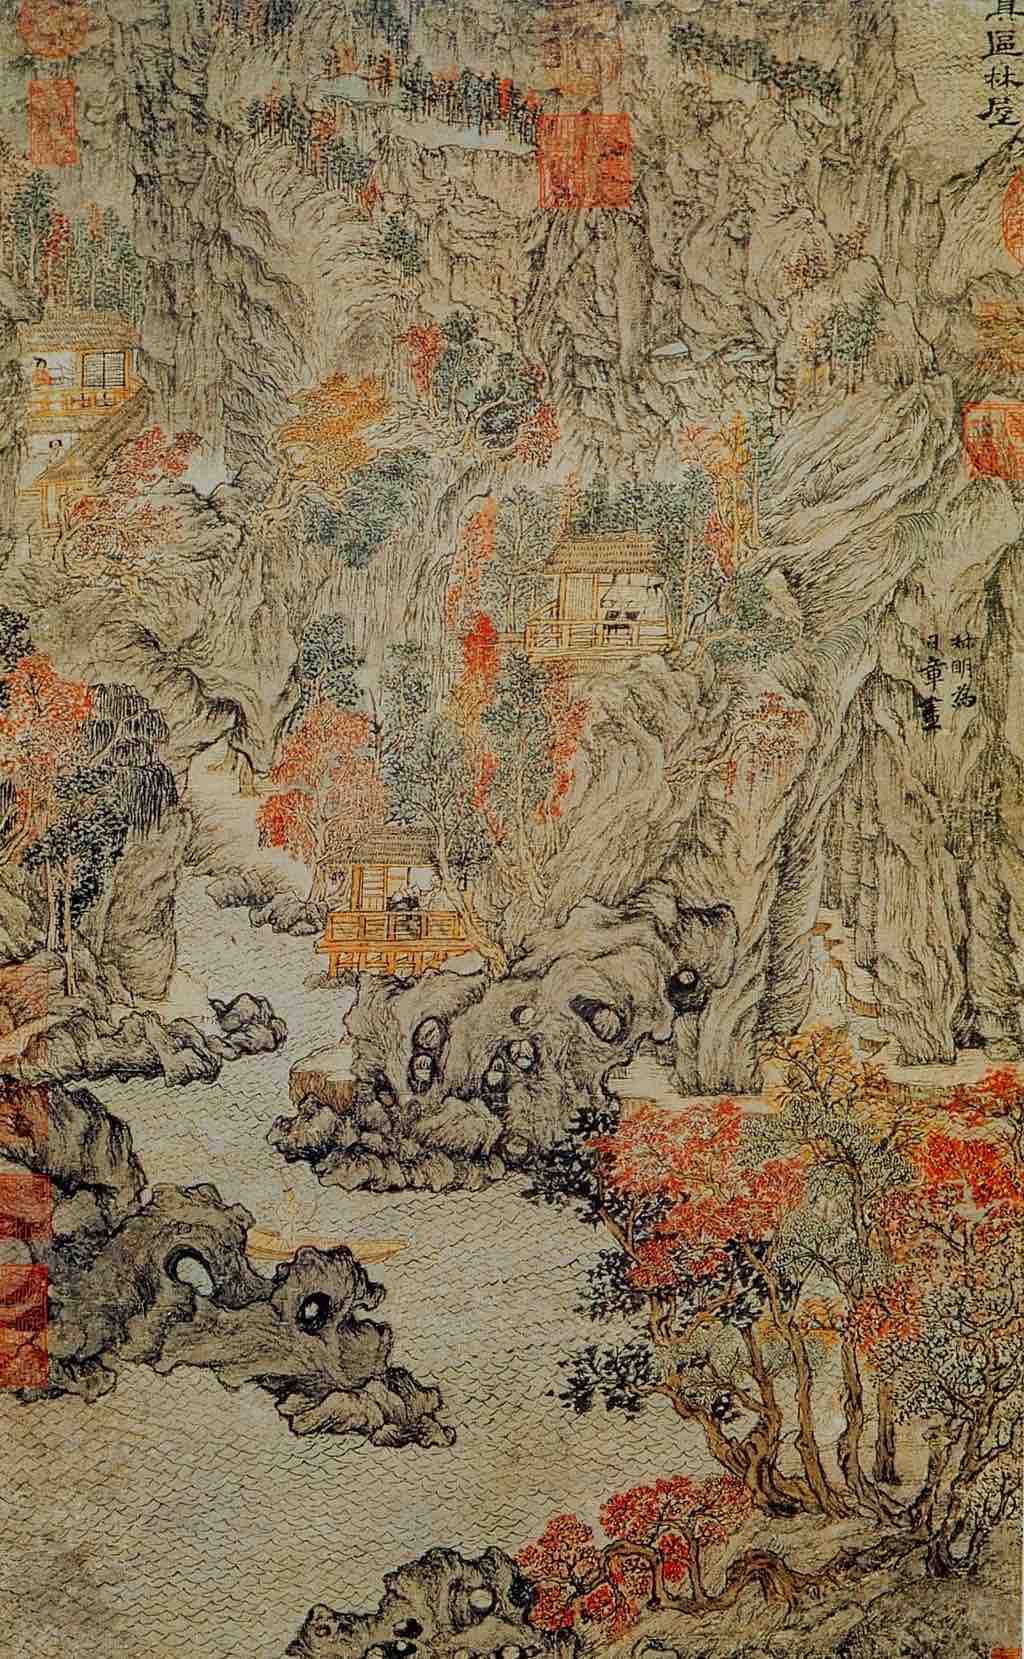 <em>Forest Grotto in Juqu</em> by Wang Meng (1378)